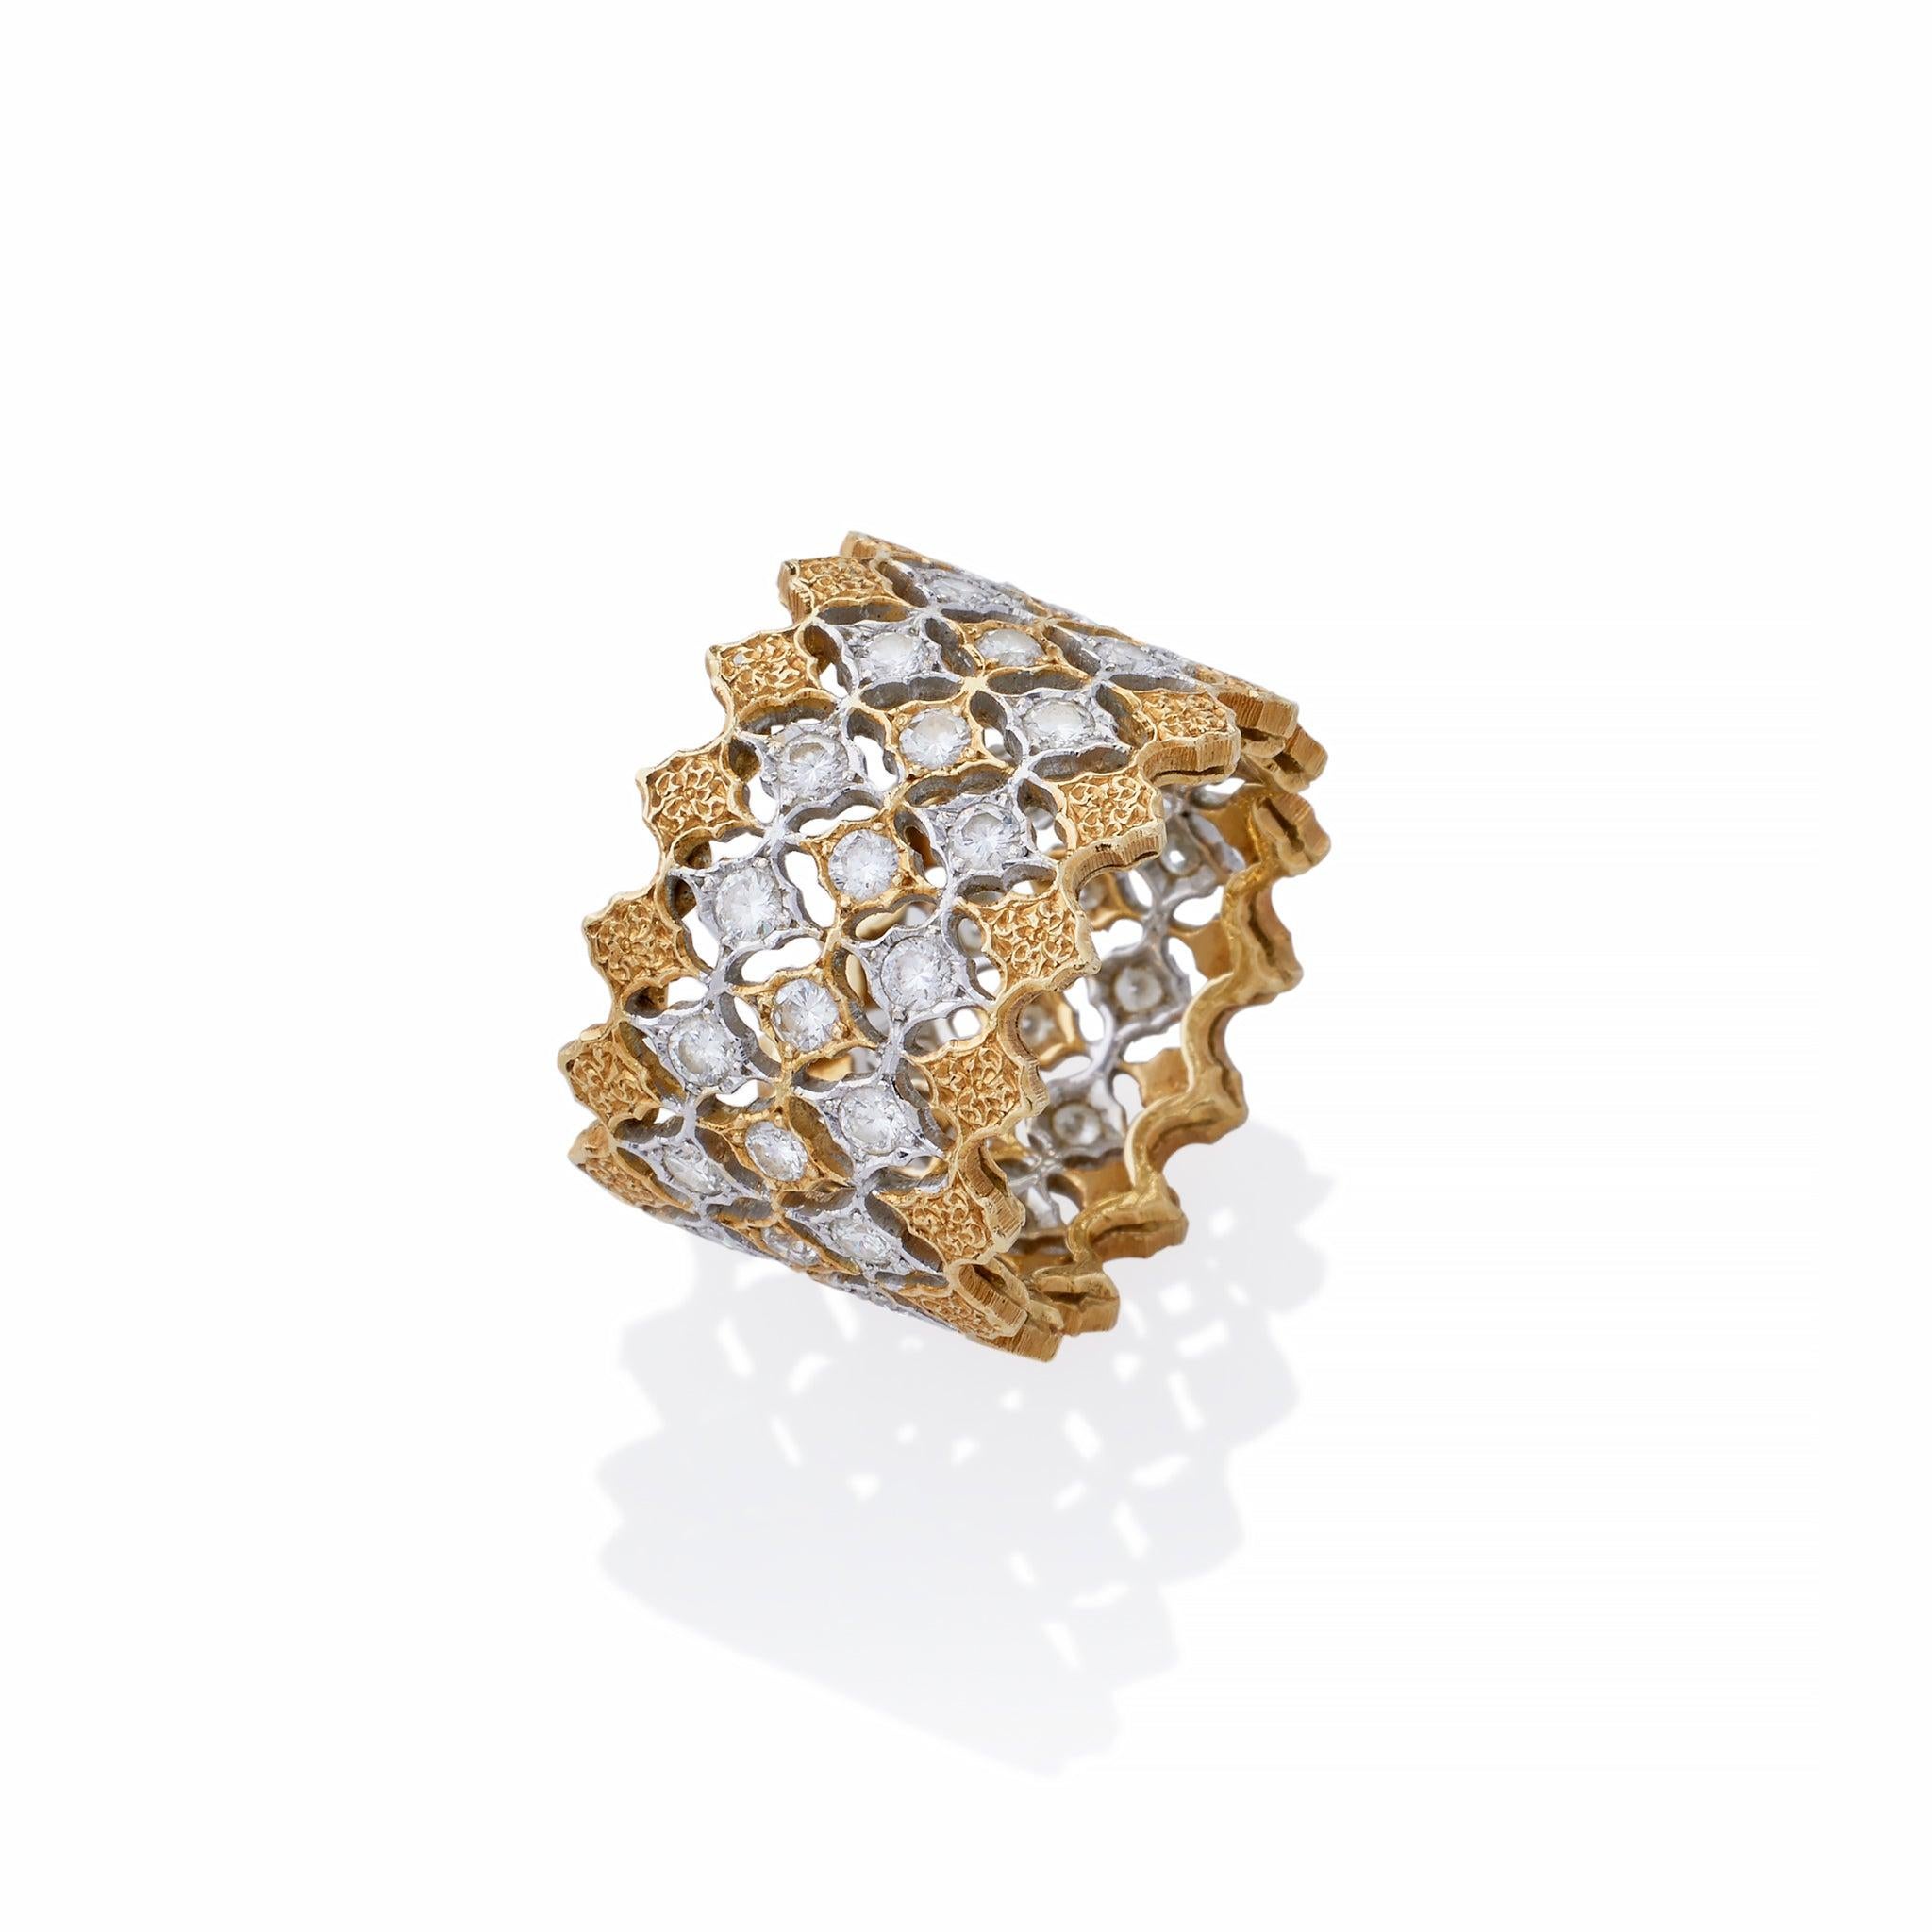 This modern diamond ring by Buccellati Milan is created of 18K bi-color gold and diamonds. The wide band is designed as a lightweight fretwork composed of three staggered rows of 